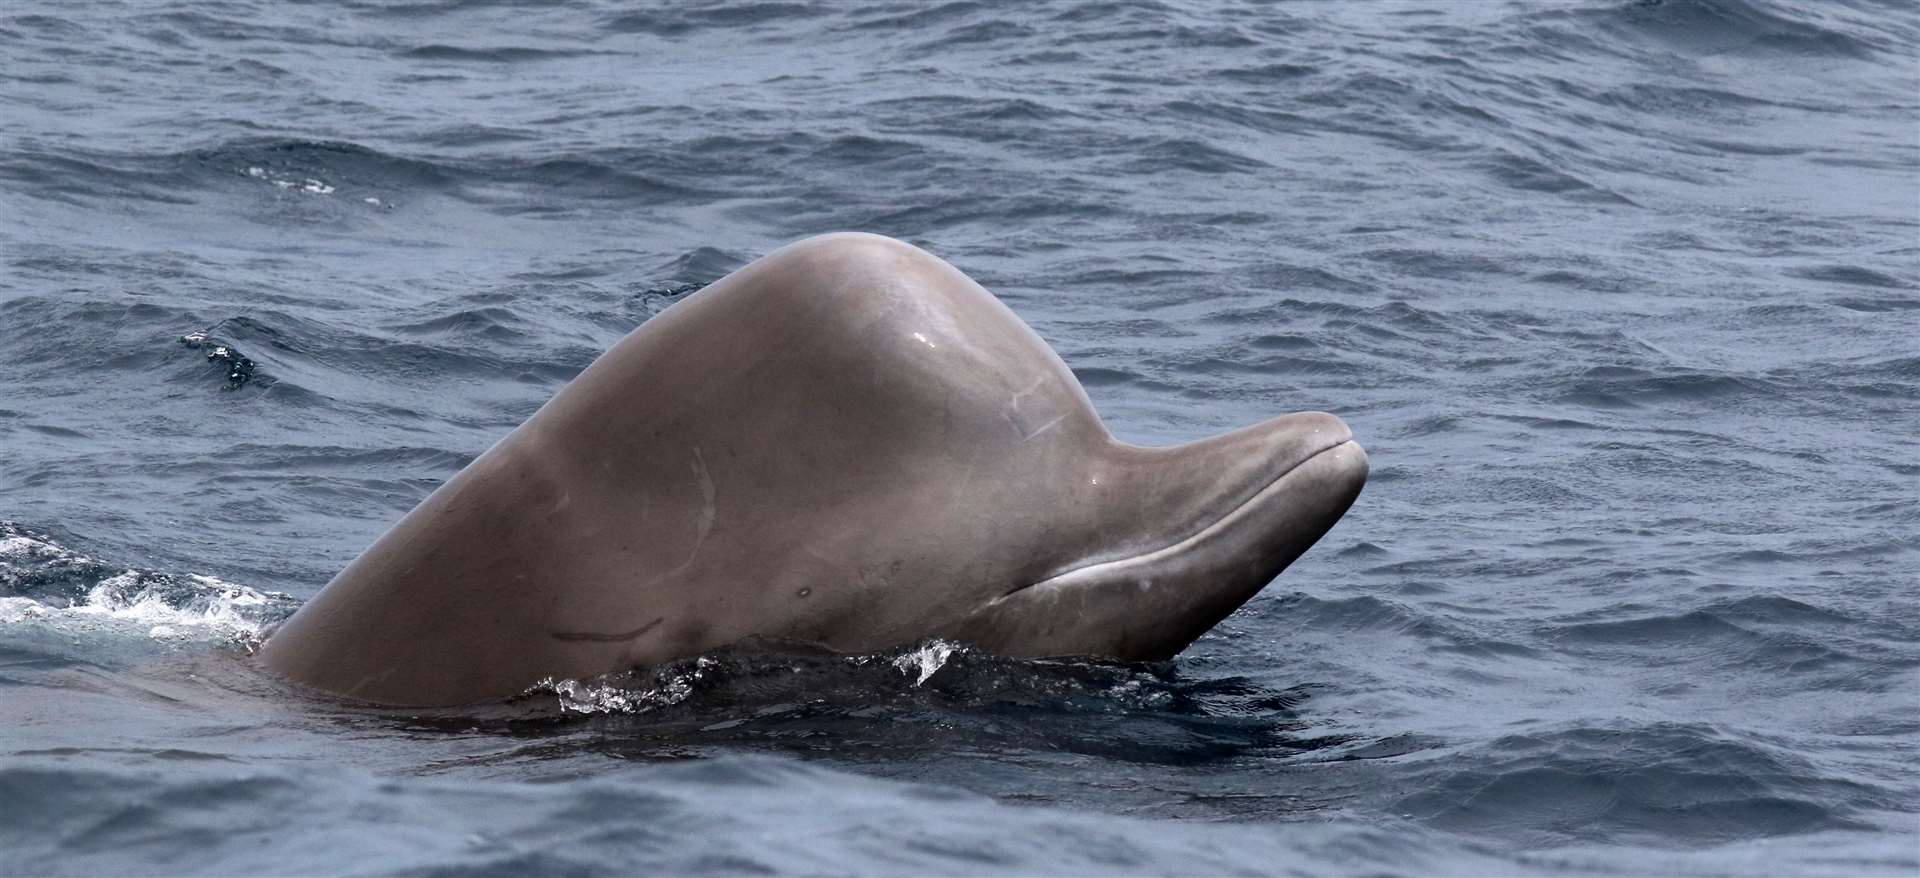 A Northern Bottlenose Whale. Picture: Cephas, CC BY-SA 4.0 <https://creativecommons.org/licenses/by-sa/4.0>, via Wikimedia Commons.